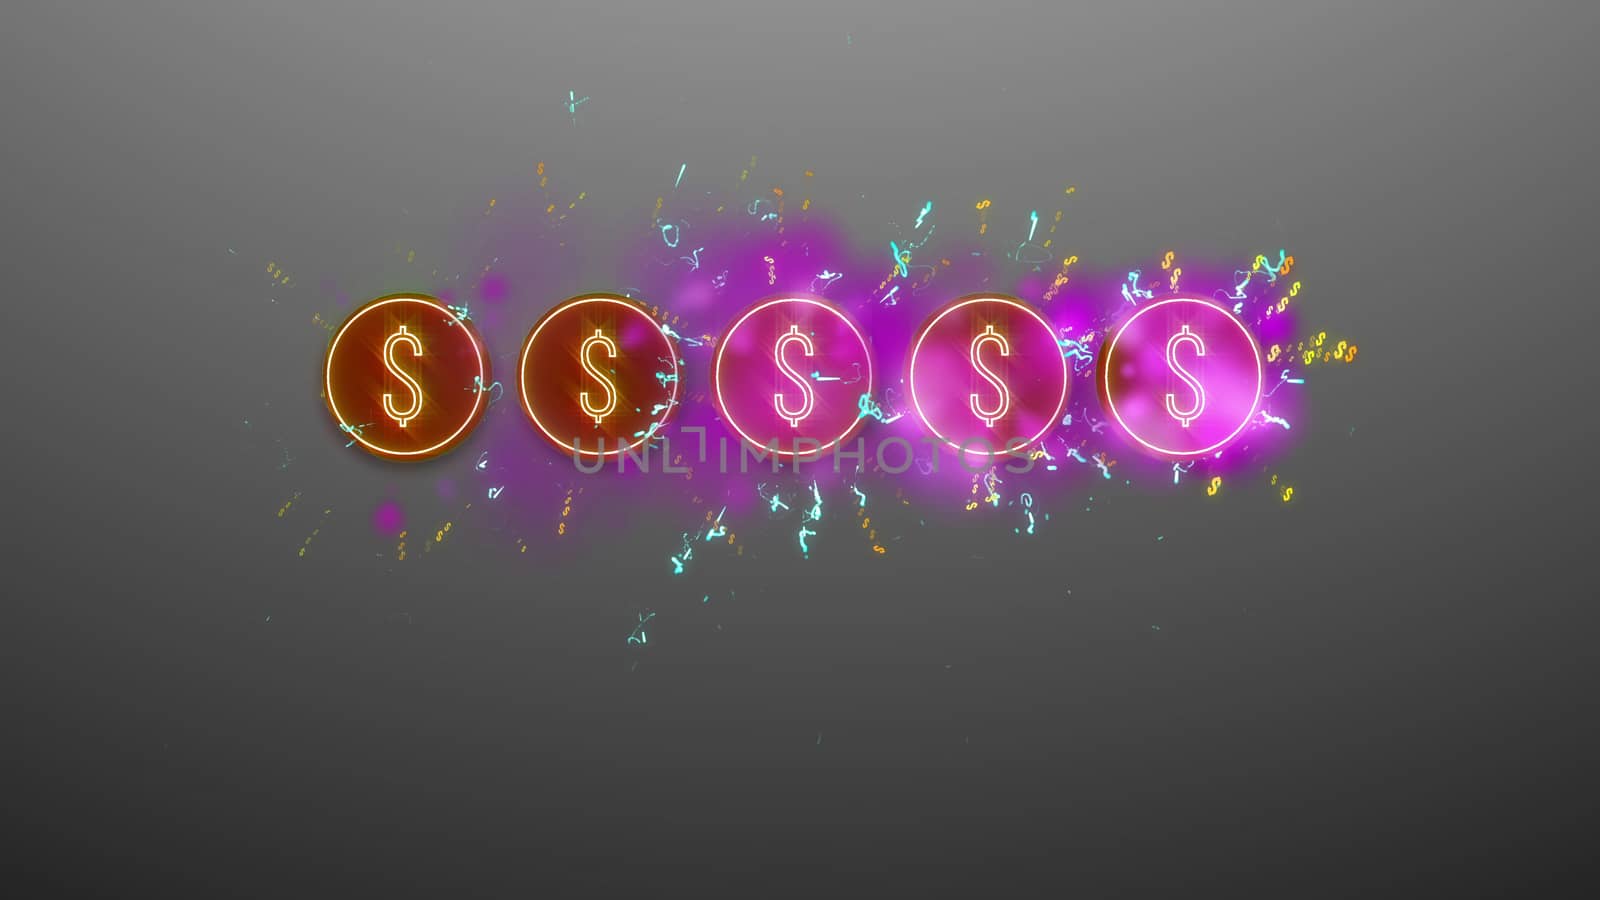 Business rating illustration with dollars by klss